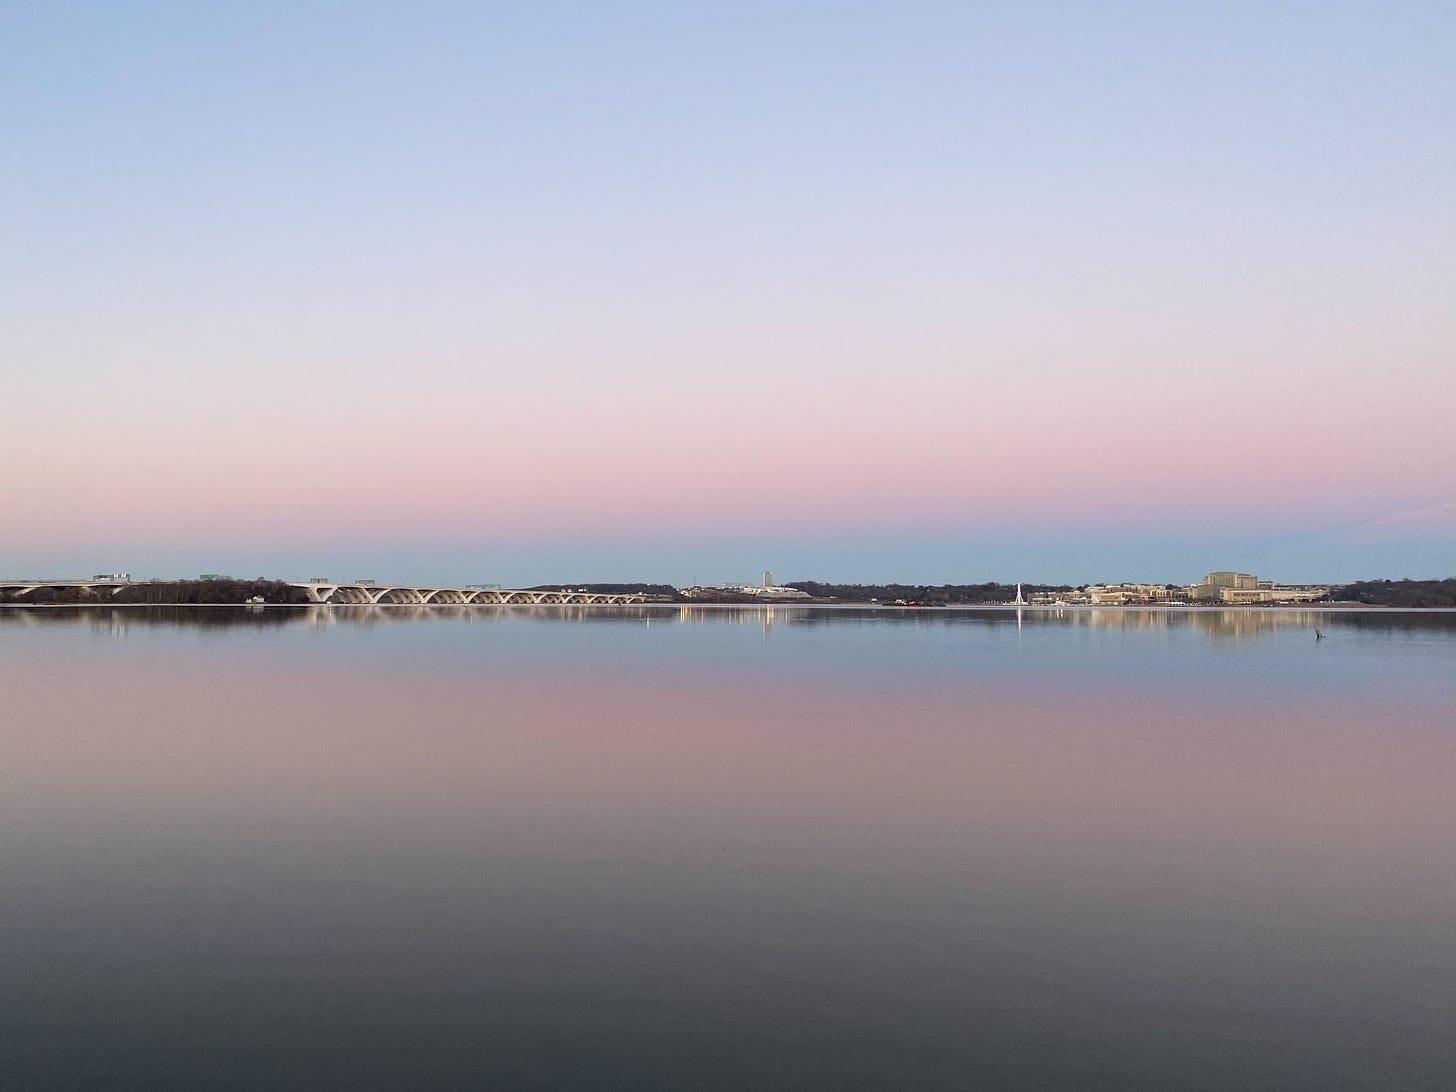 Photo of a calm, flat, wide river with a bridge in the distance and the sunset hues of blue, white, pink and purple reflected onto the water from the sky.